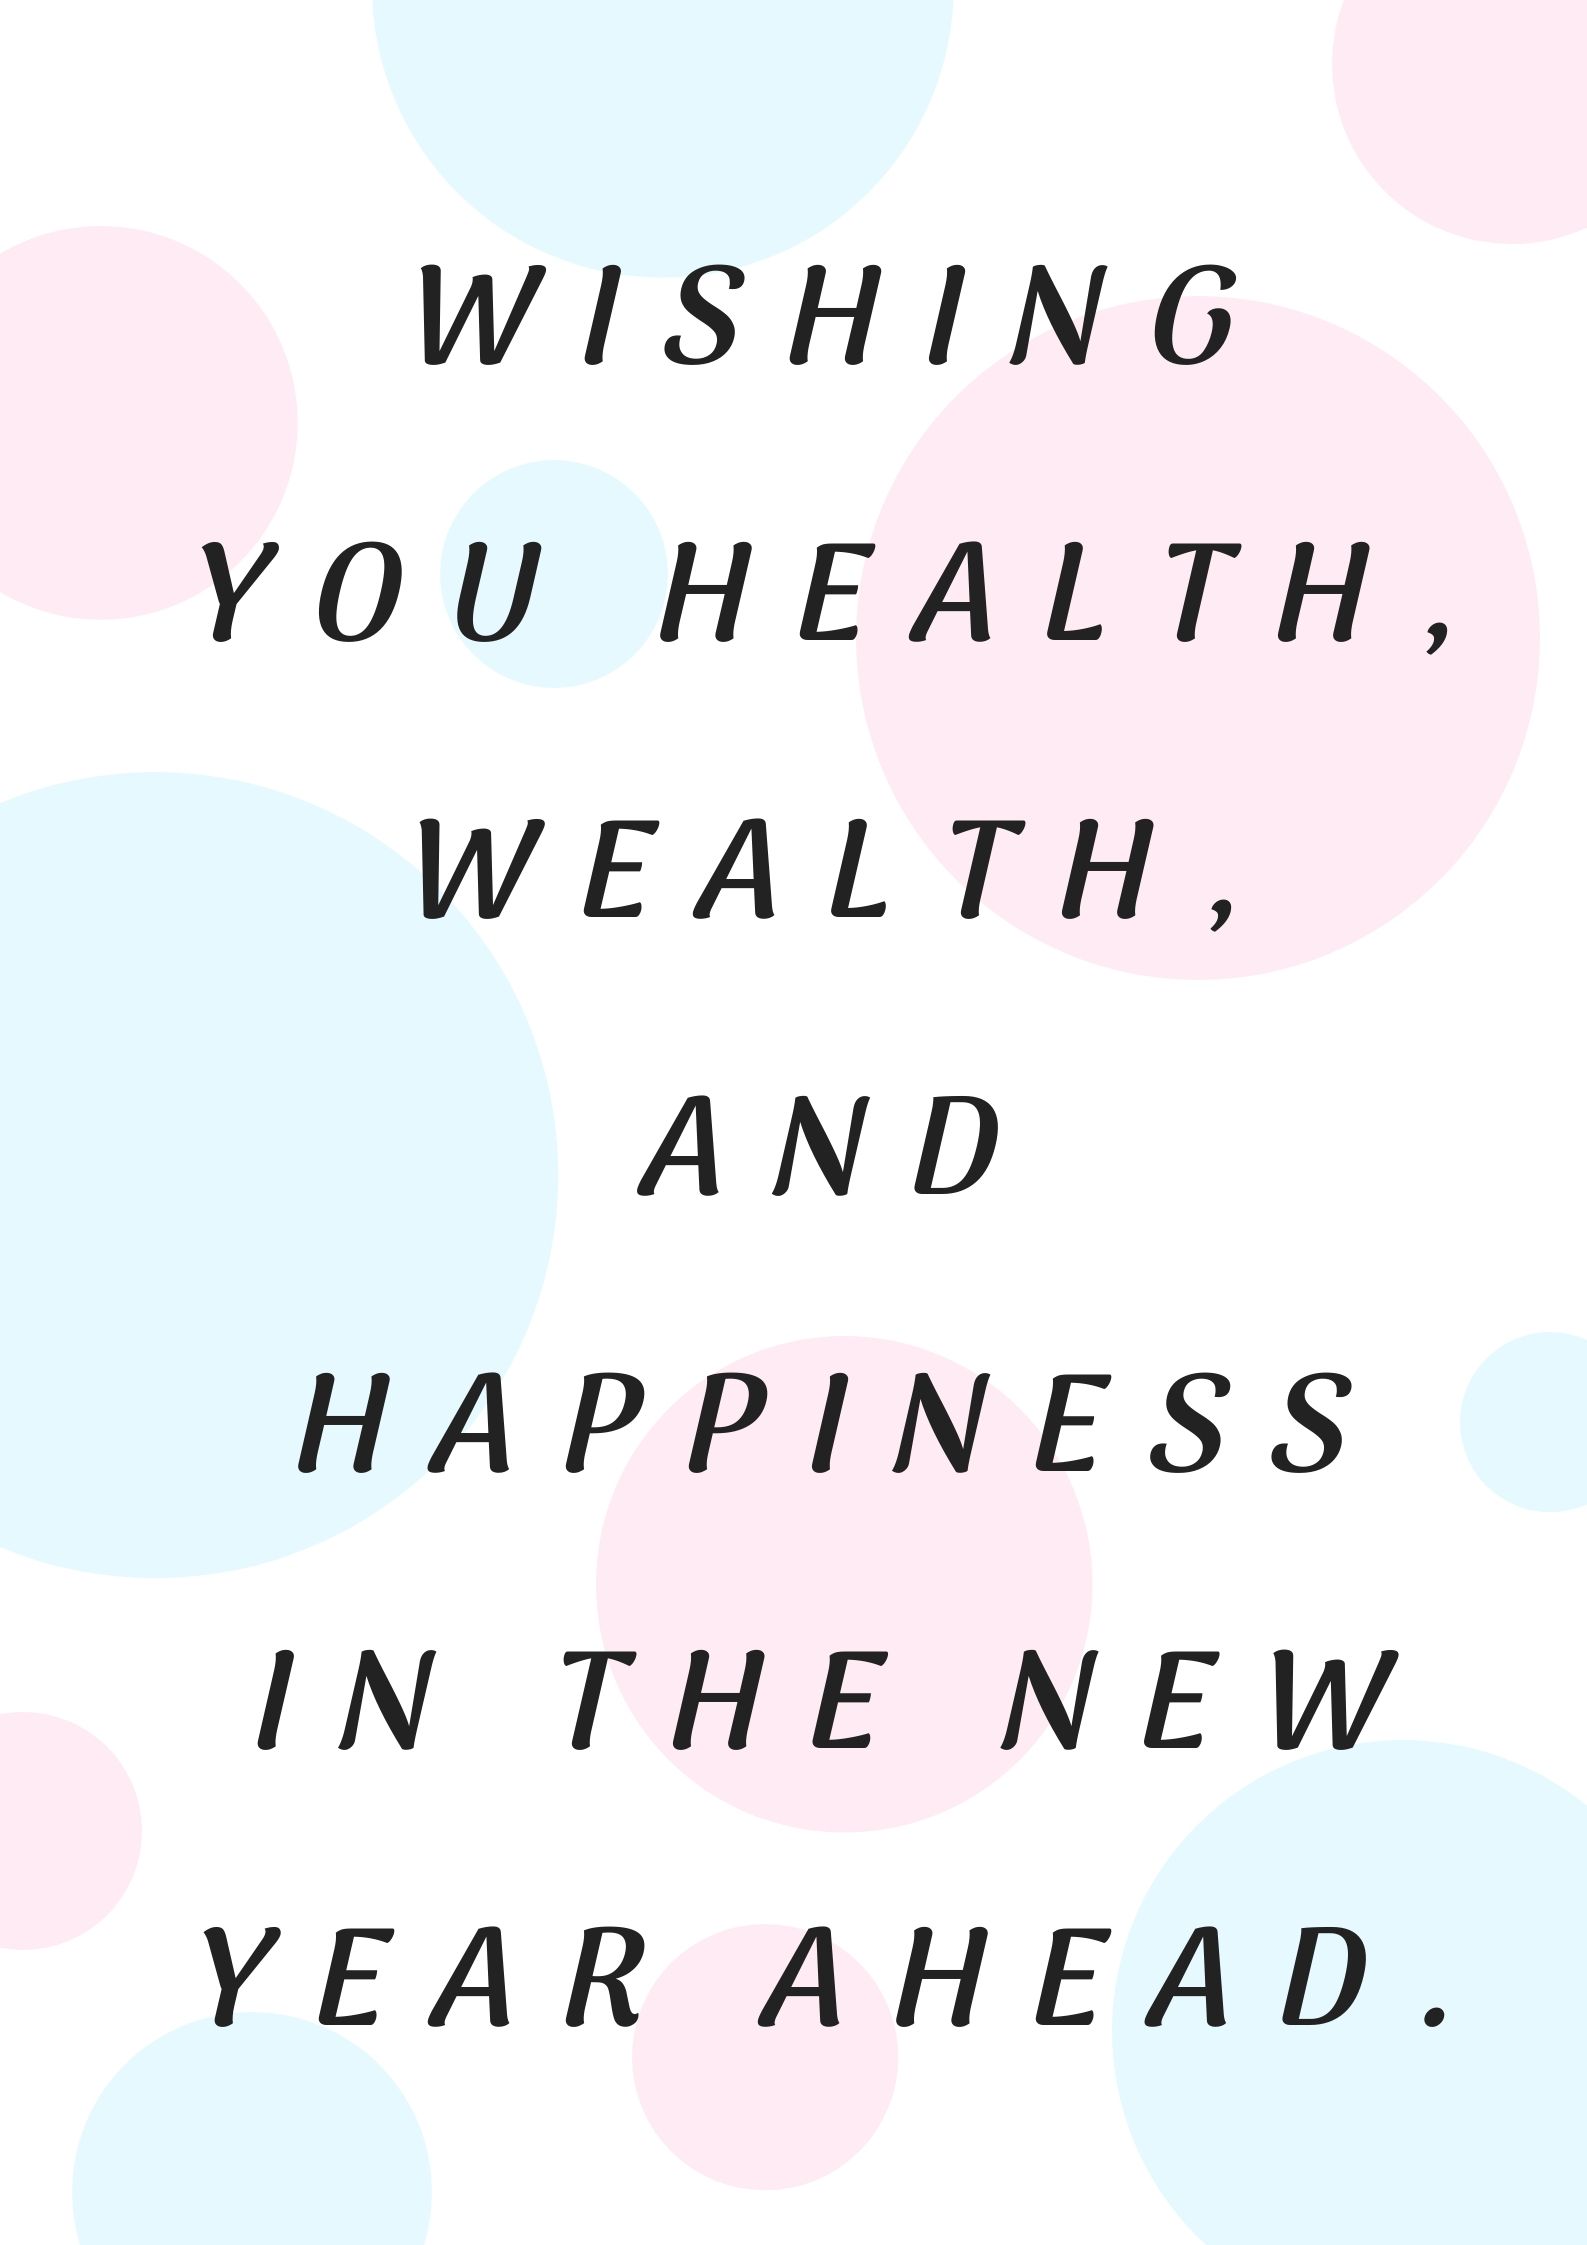 Wishing you health, wealth, and happiness in the New Year ahead.